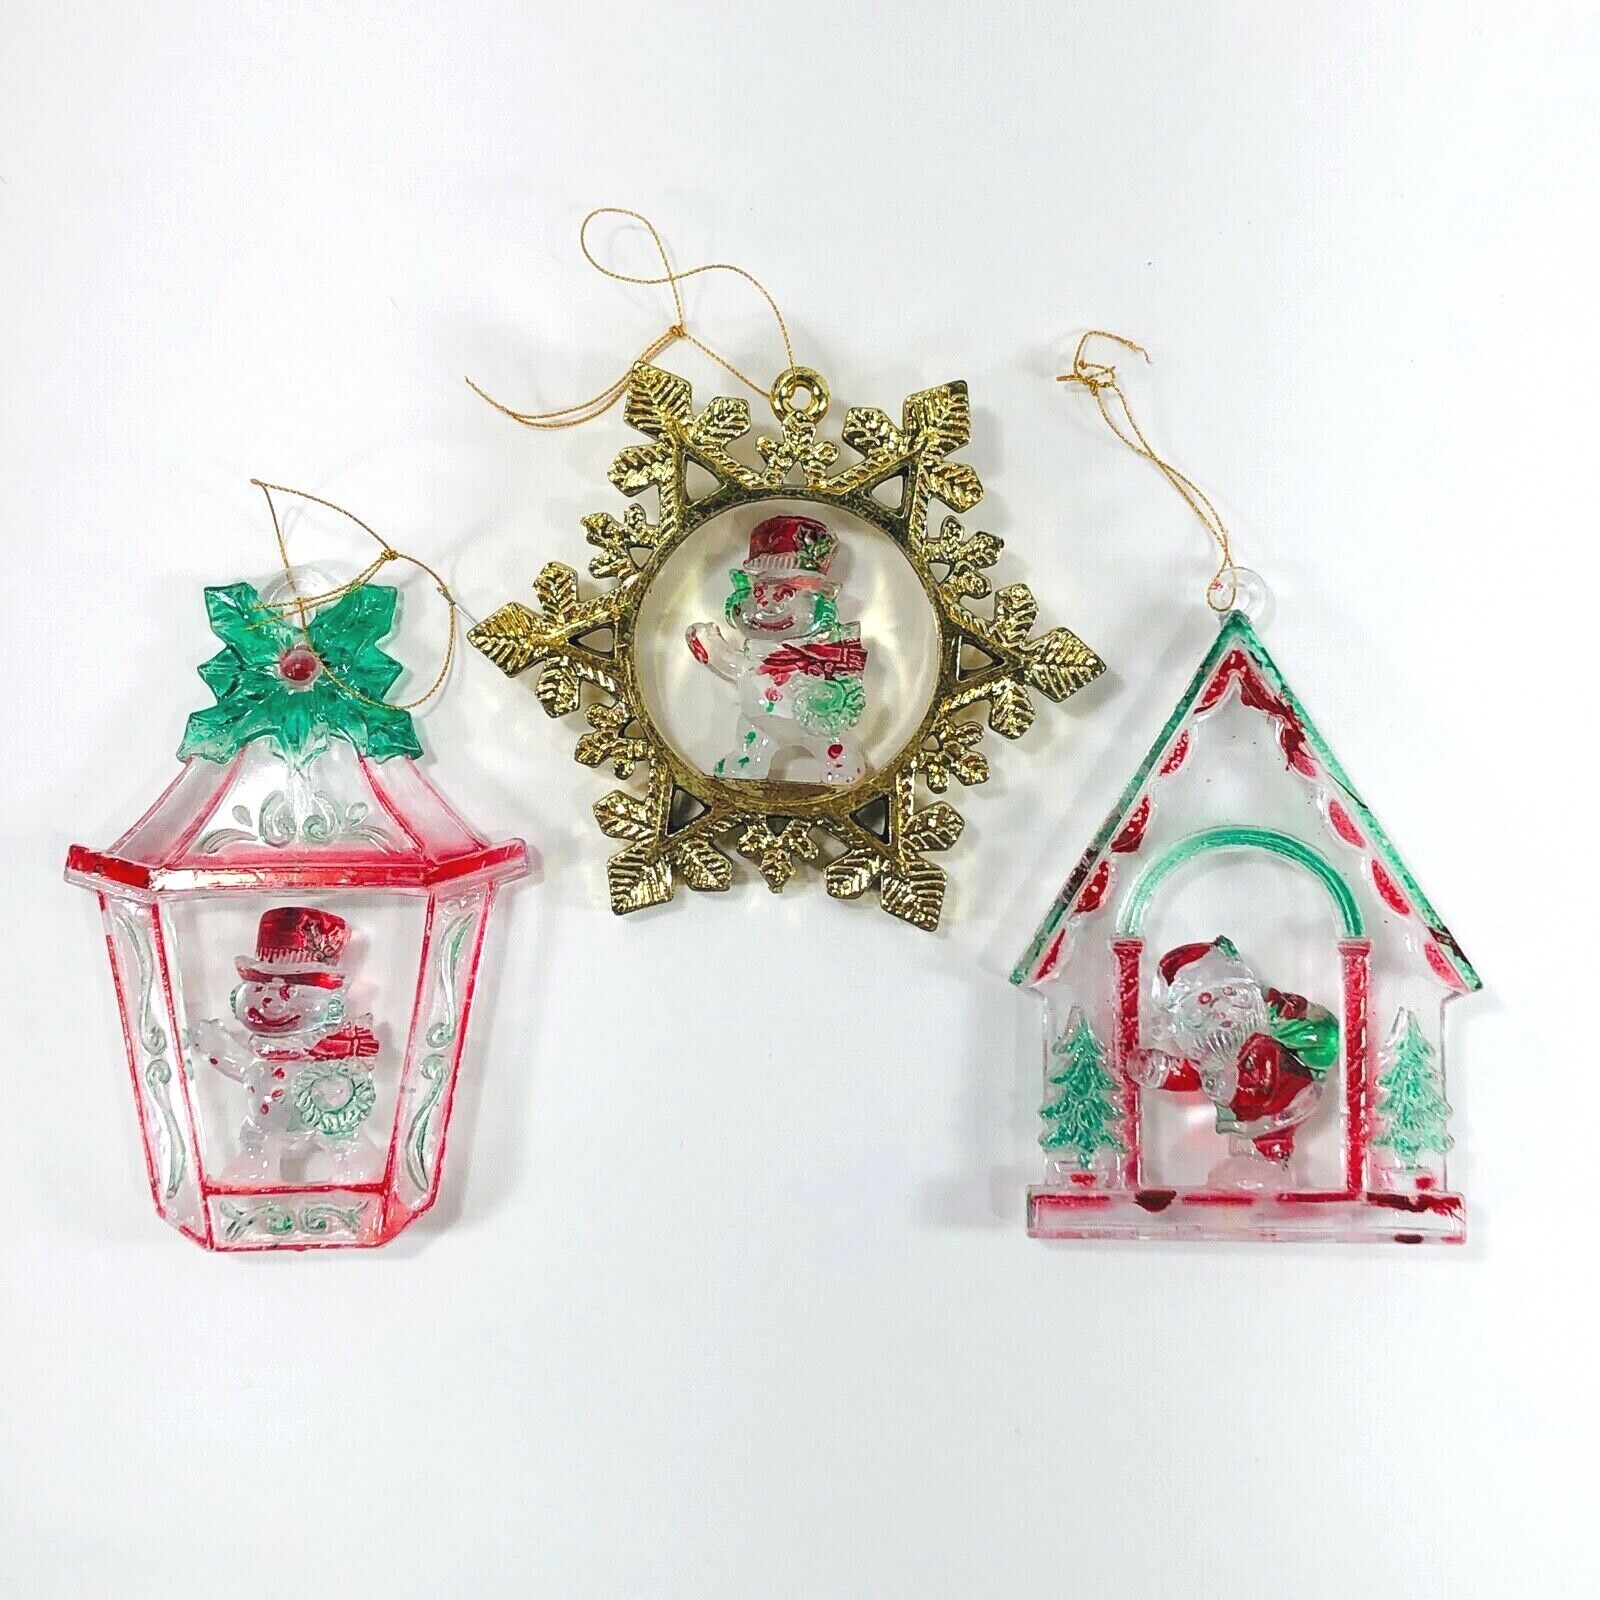 Vtg Acrylic with Red and Green Christmas Ornament Plastic Decoration Set of 3 Unbranded Does Not Apply